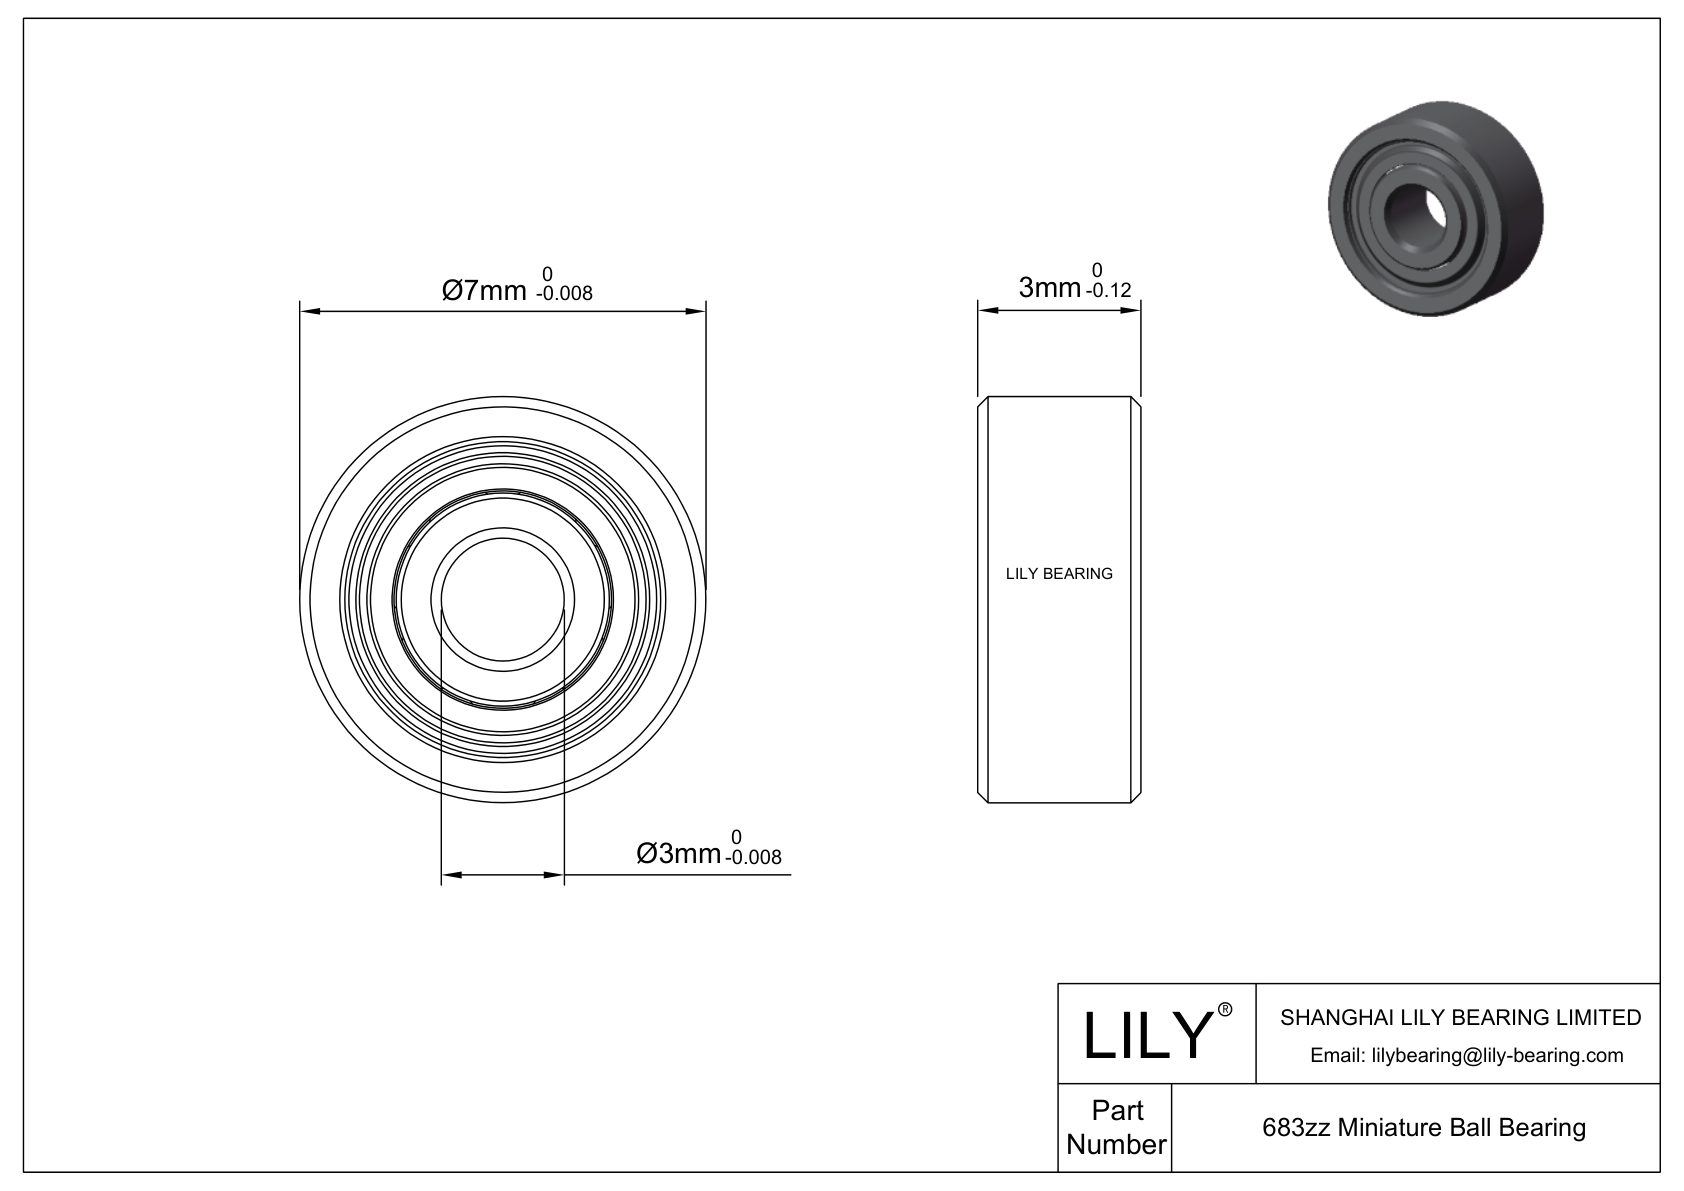 LILY-BS68312-3 POM Coated Bearing cad drawing